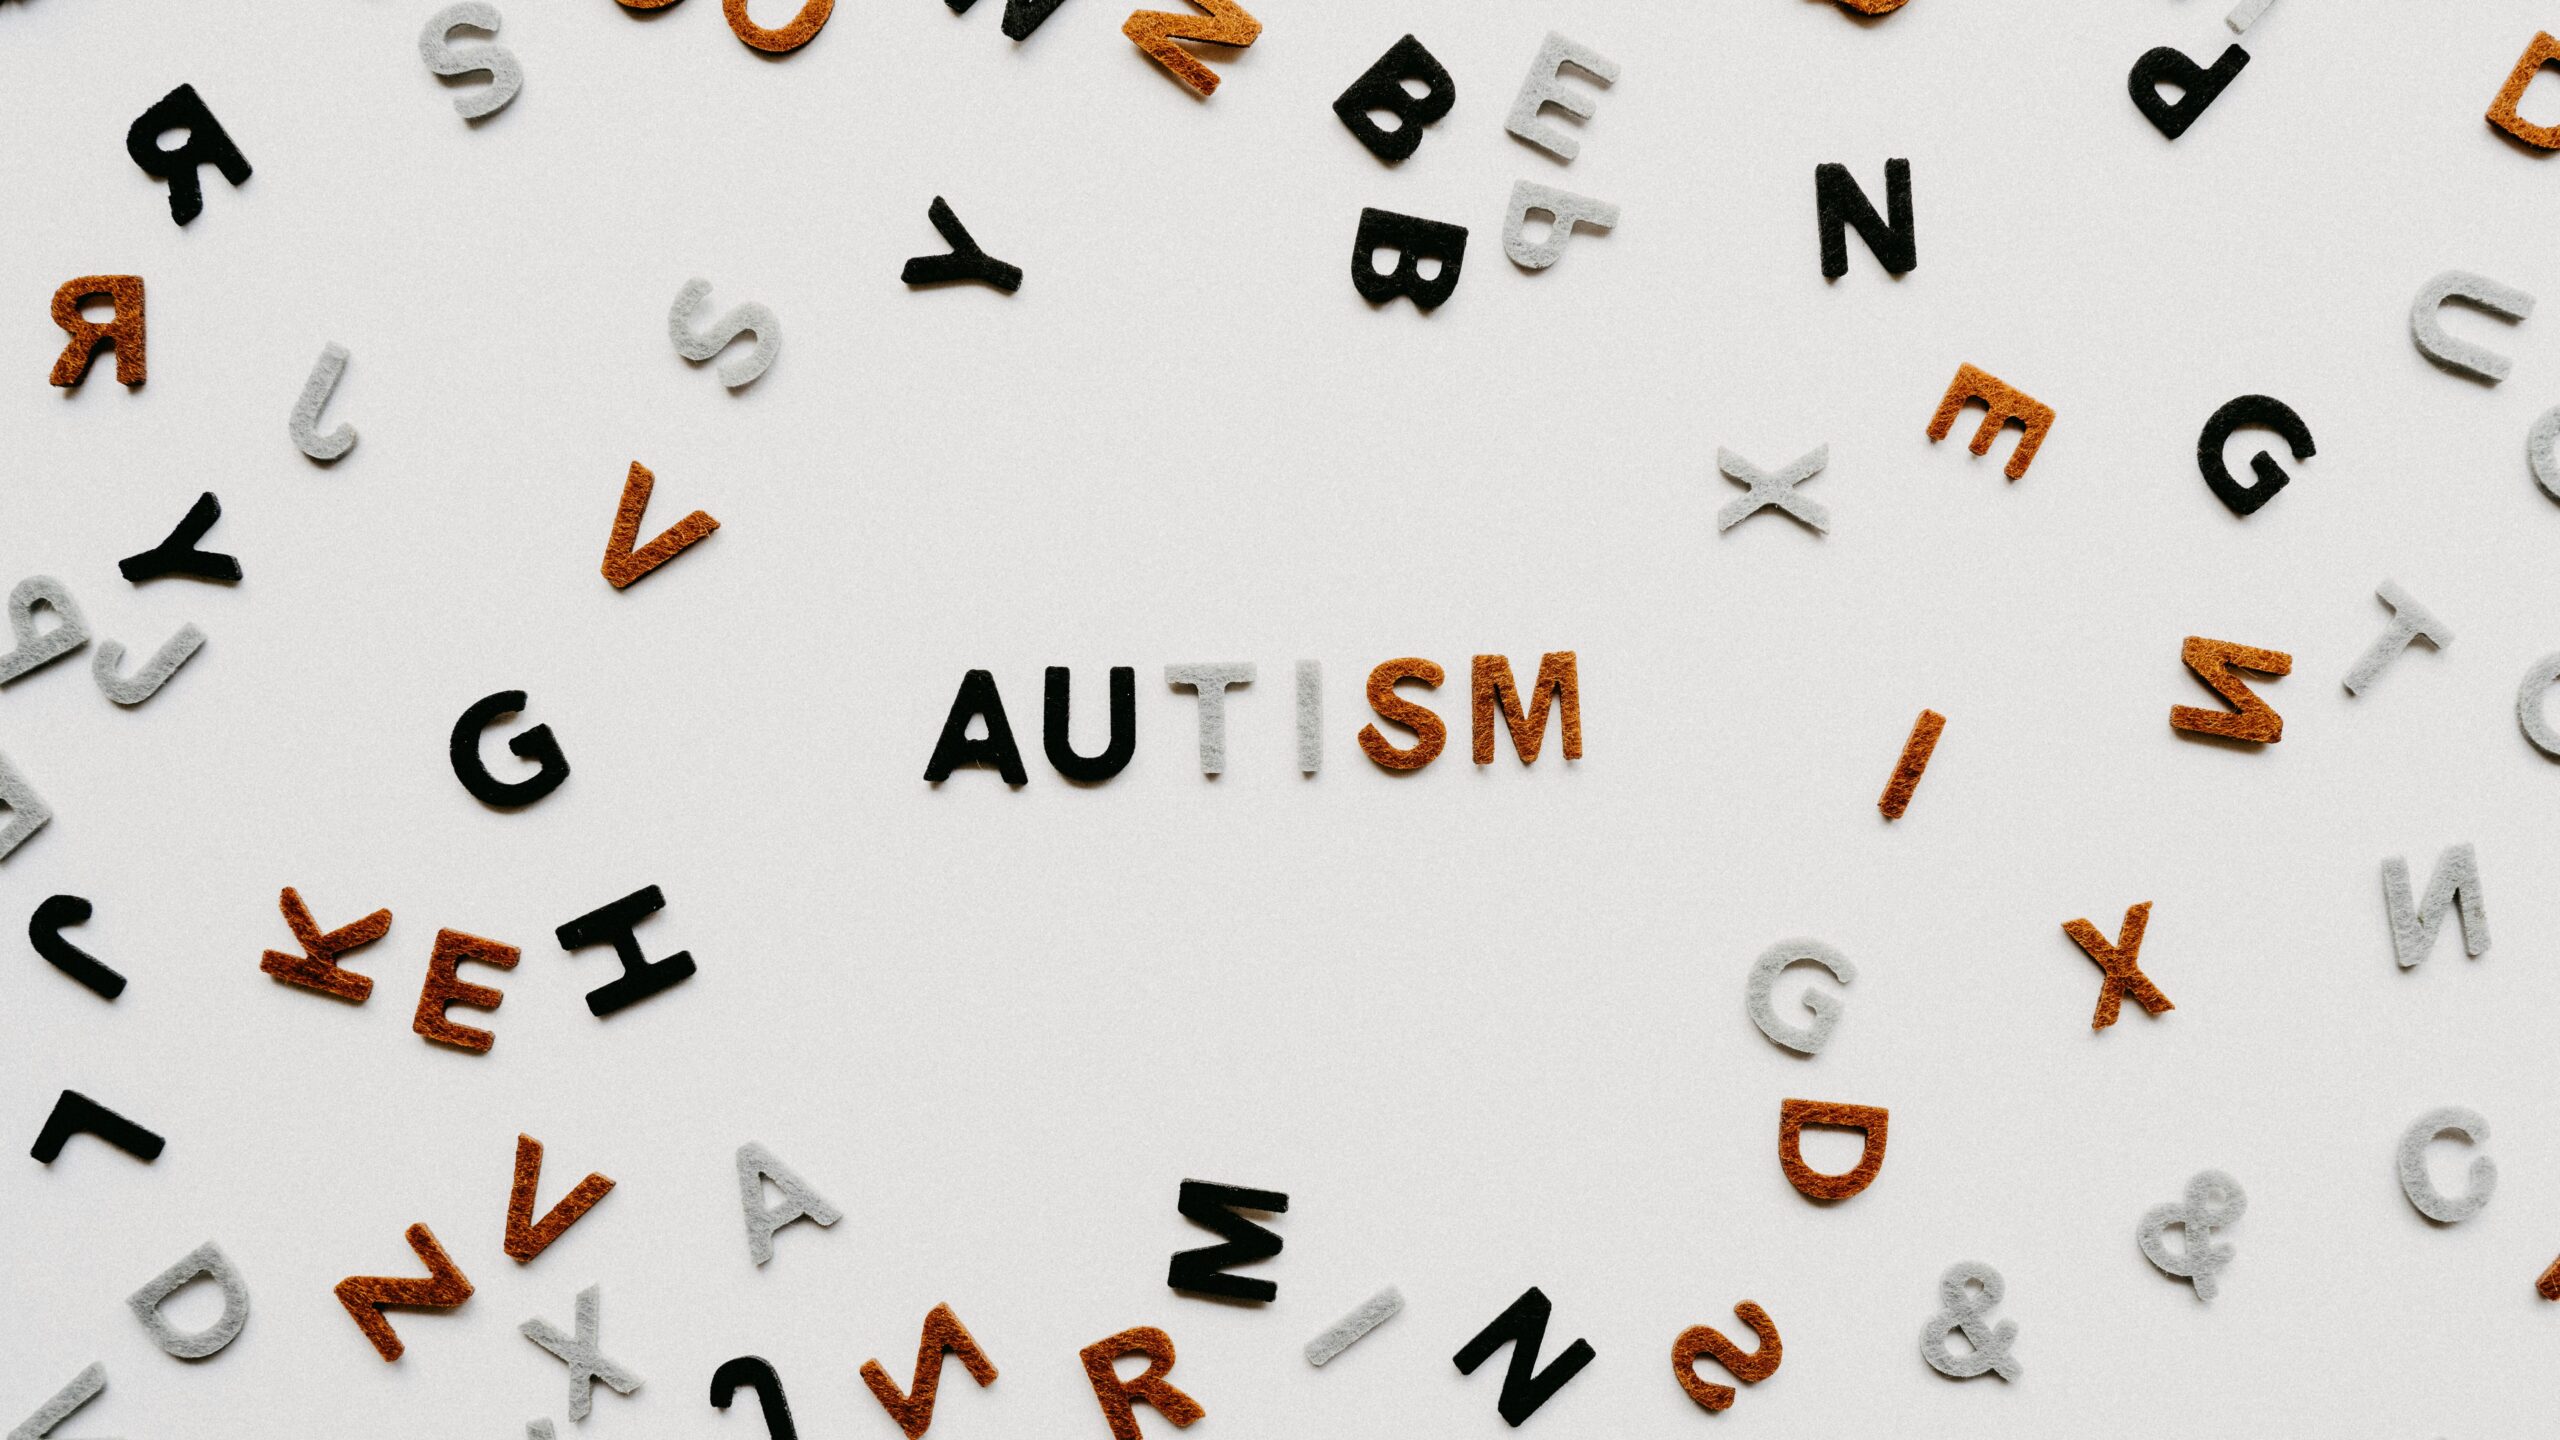 Autism spelled out in letters